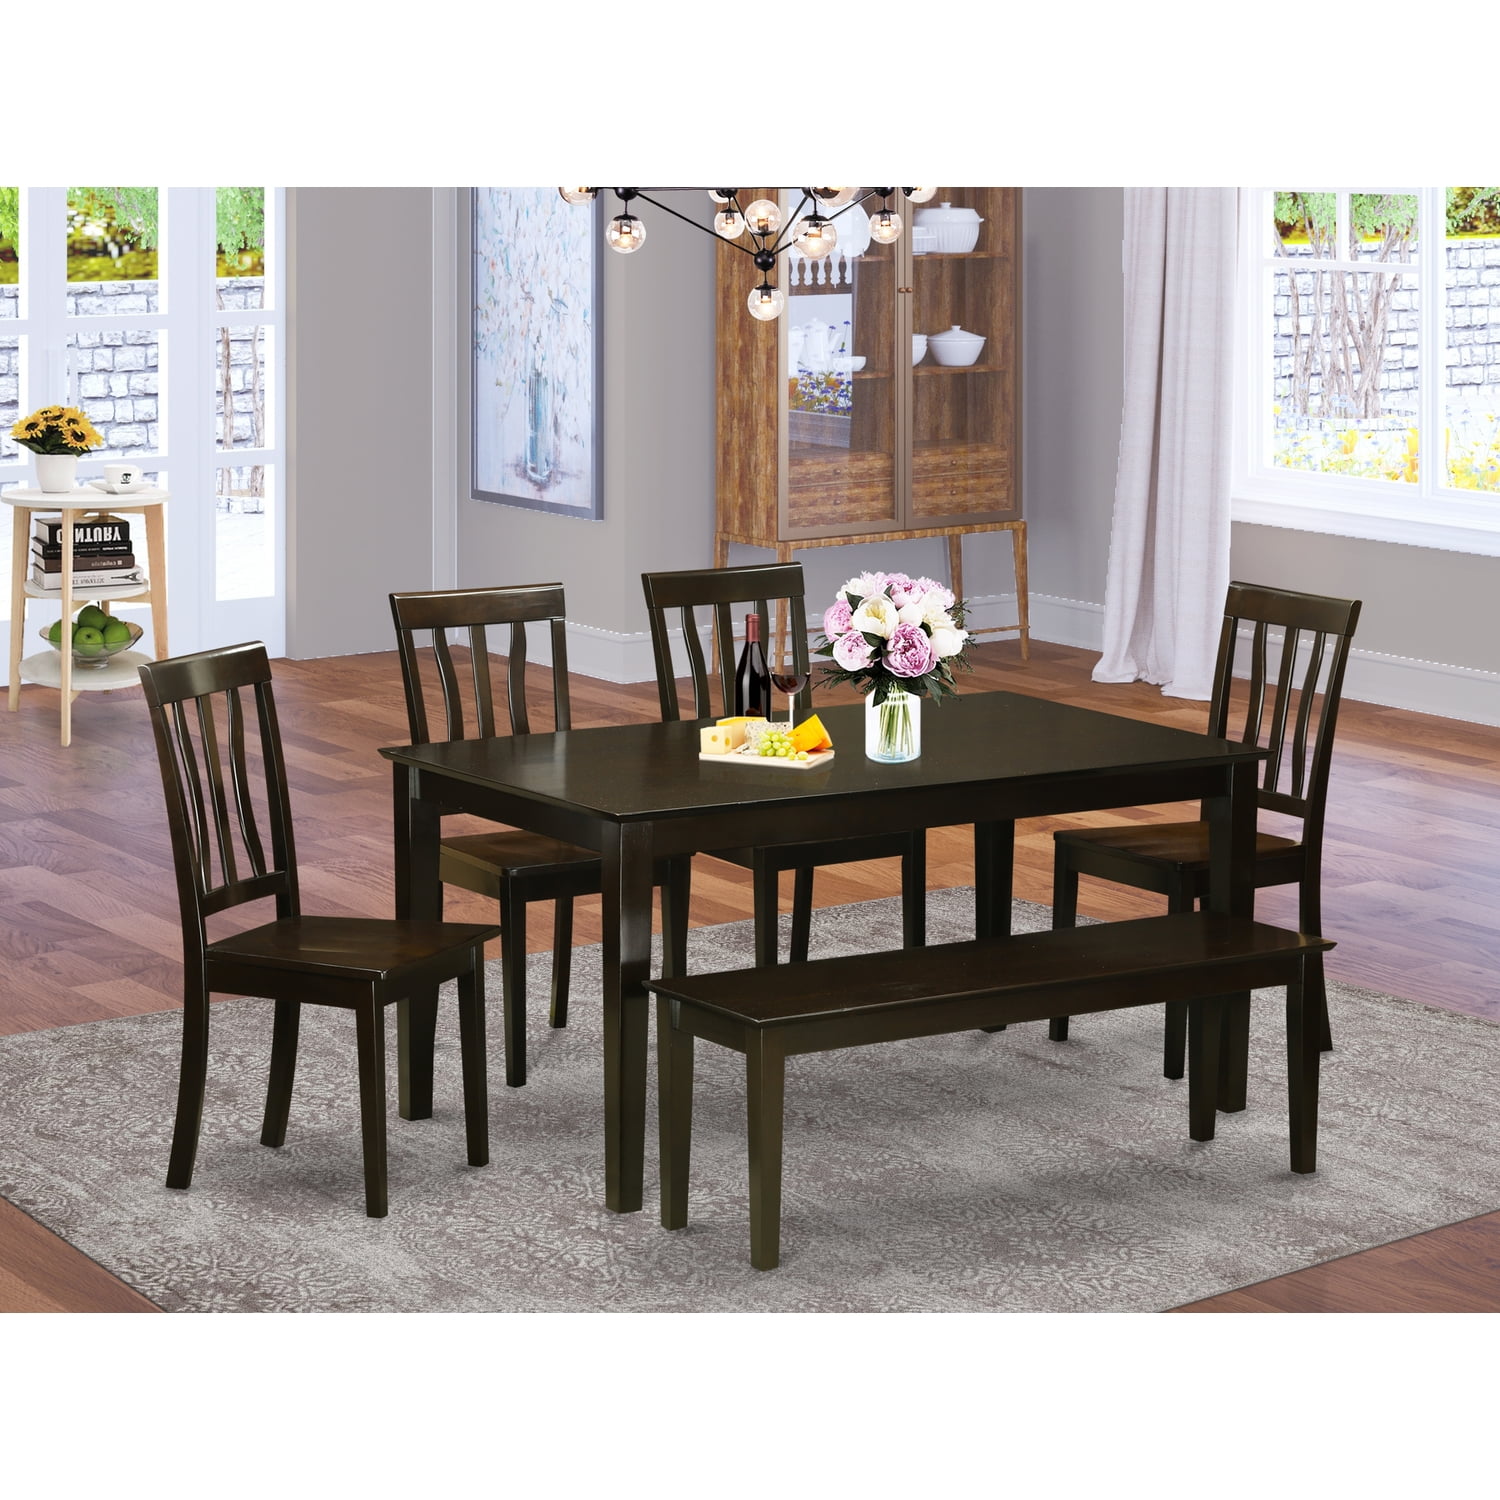 Dining Table With Bench Set- Kitchen Table With 4 Chairs Plus Bench